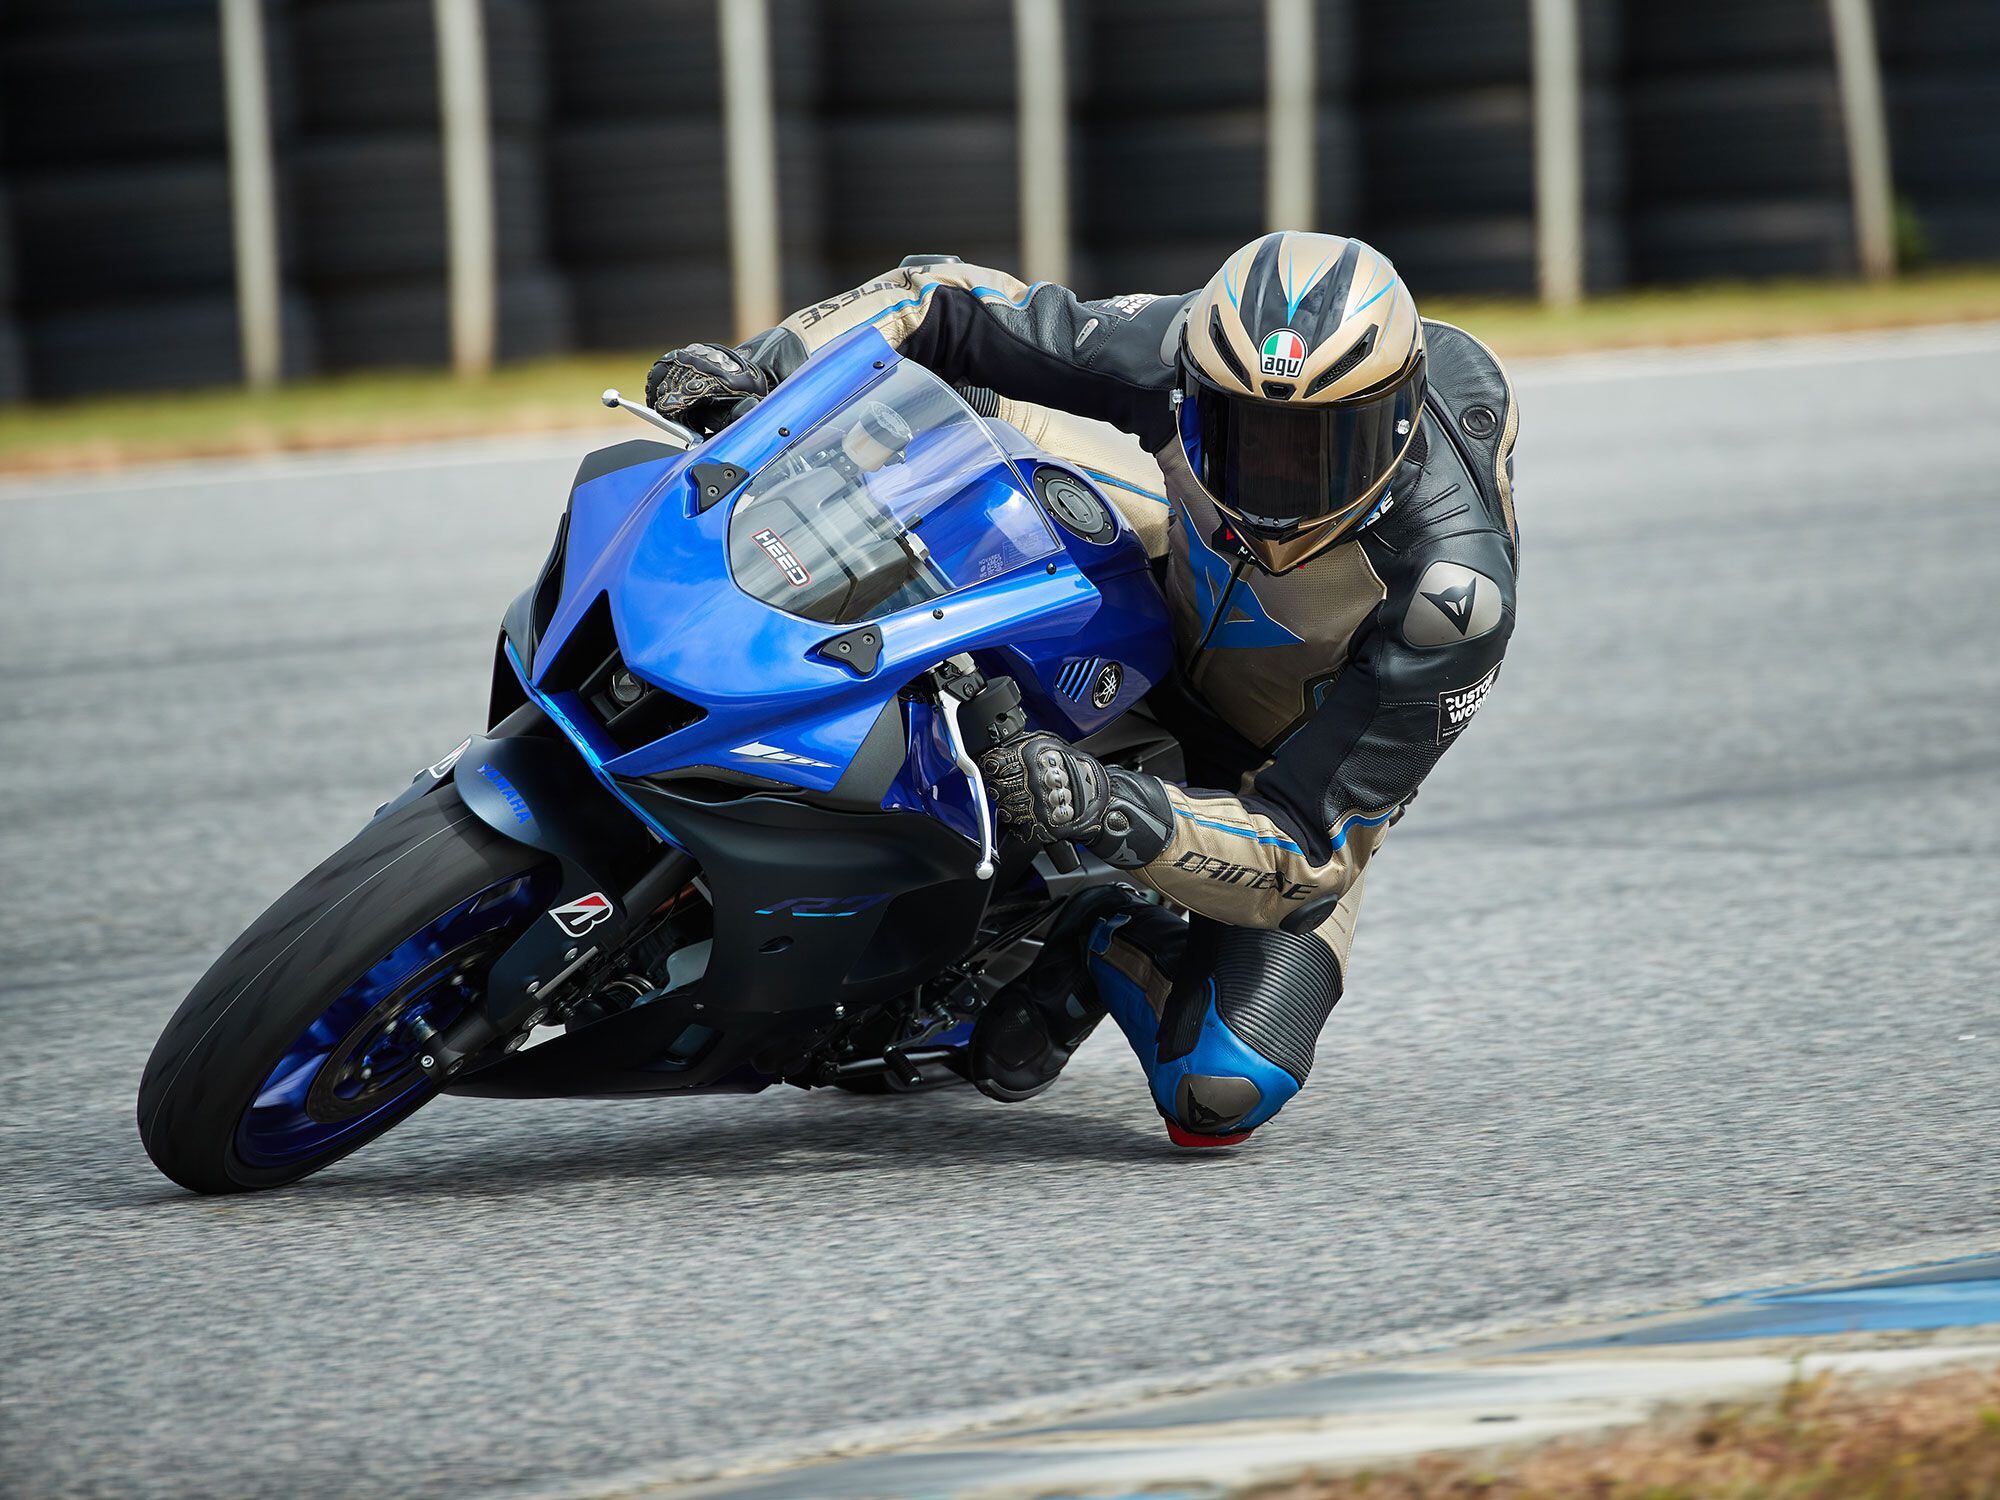 The YZF-R7 is a fun little sportbike. It offers just enough performance to keep you engaged but not so much to intimidate riders.